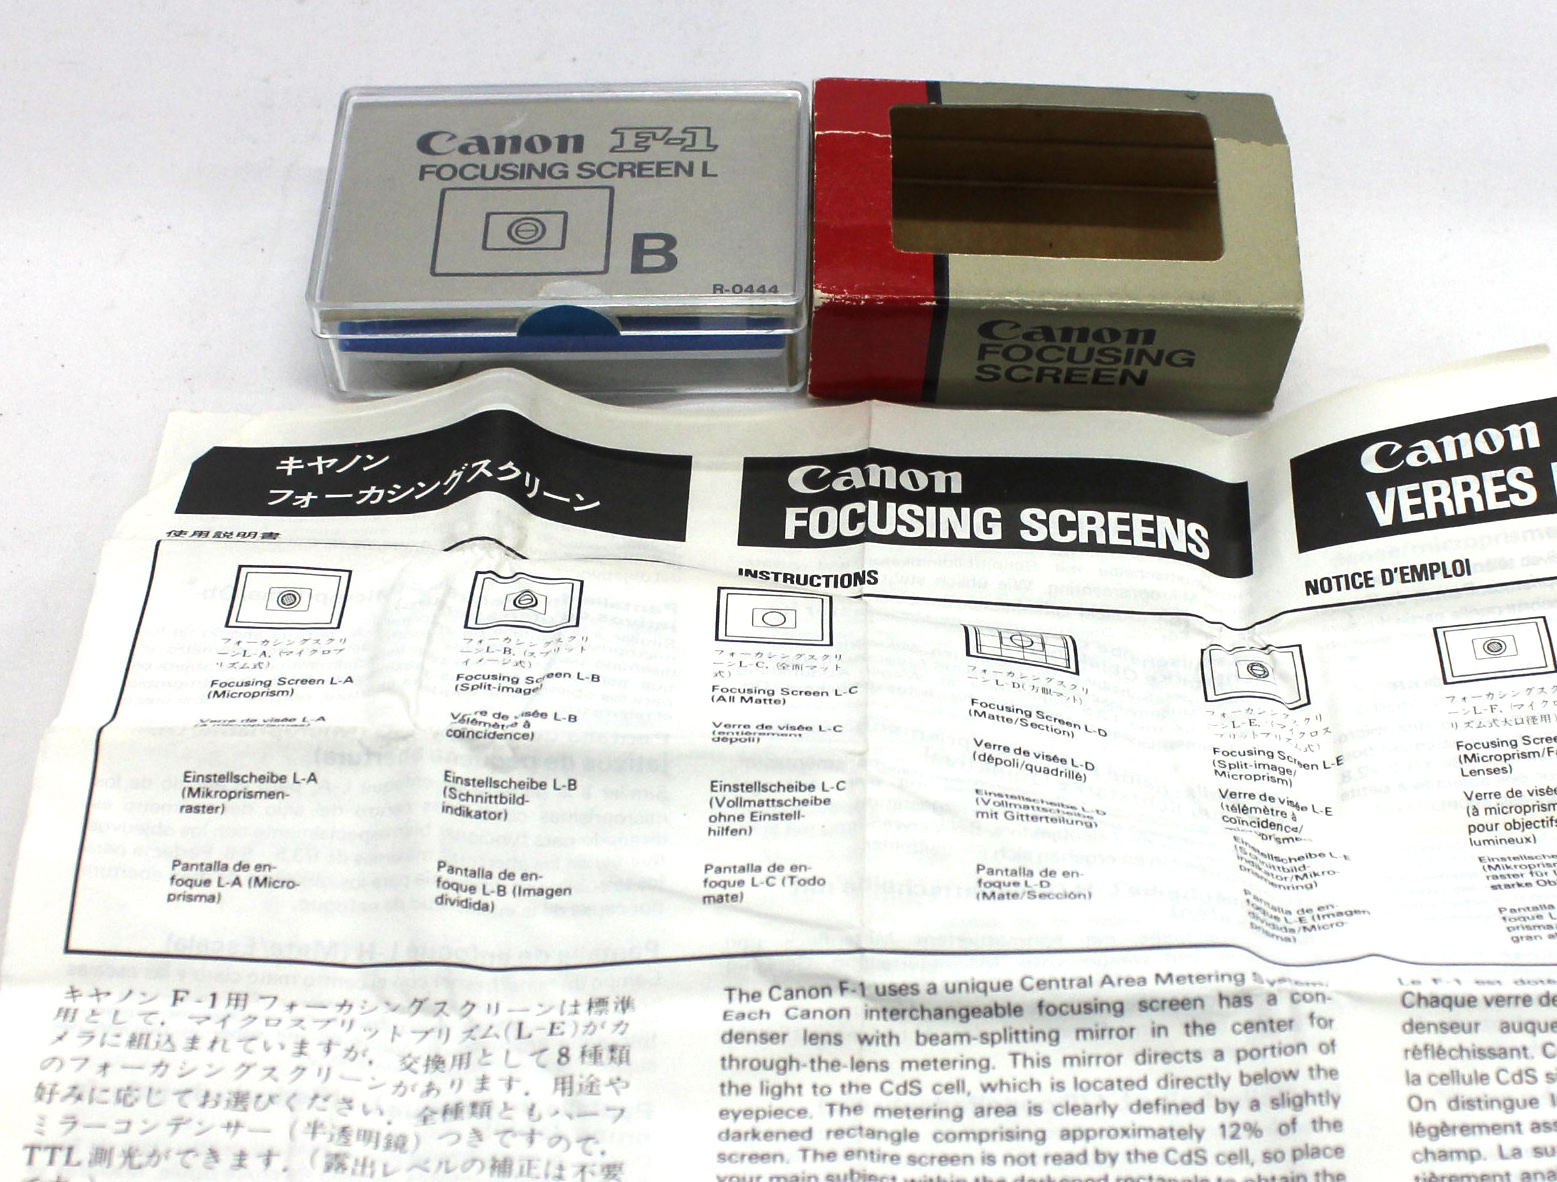 Japan Used Camera Shop | [Excellent+++++] Canon Focusing Screen L Type B Split-Image for F1 SLR Camera from Japan